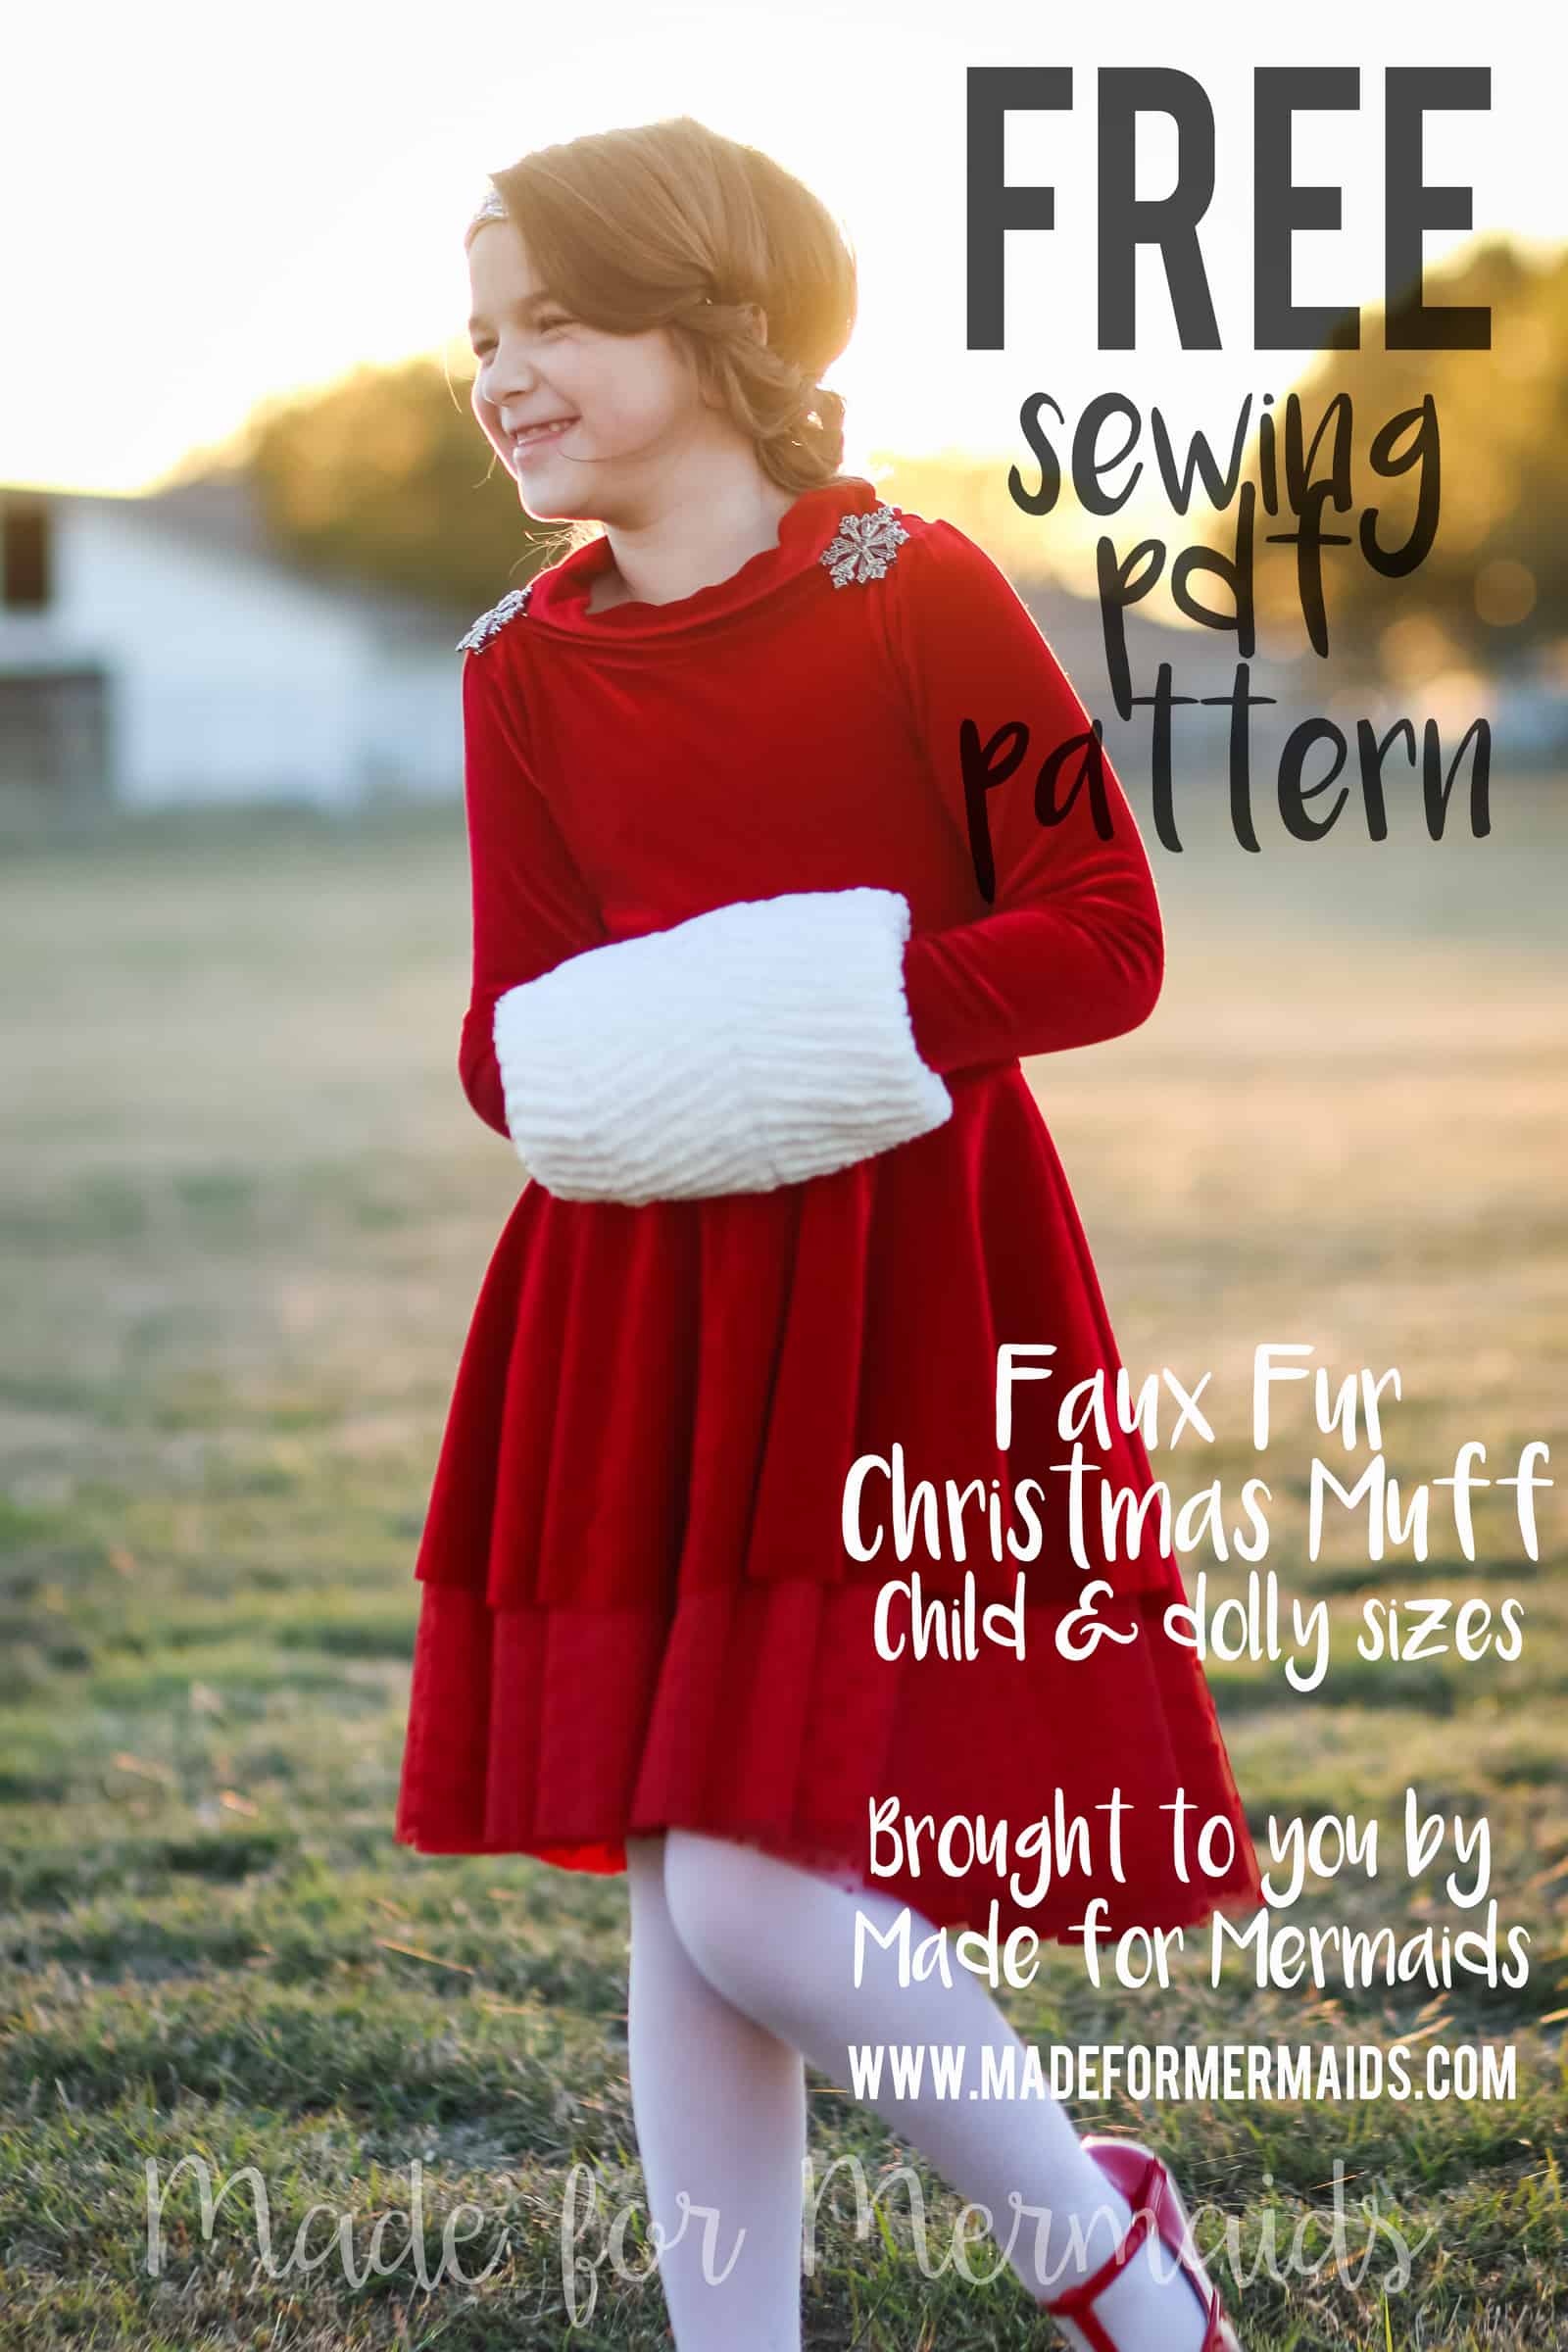 Christmas Muff for Girls & Dolly